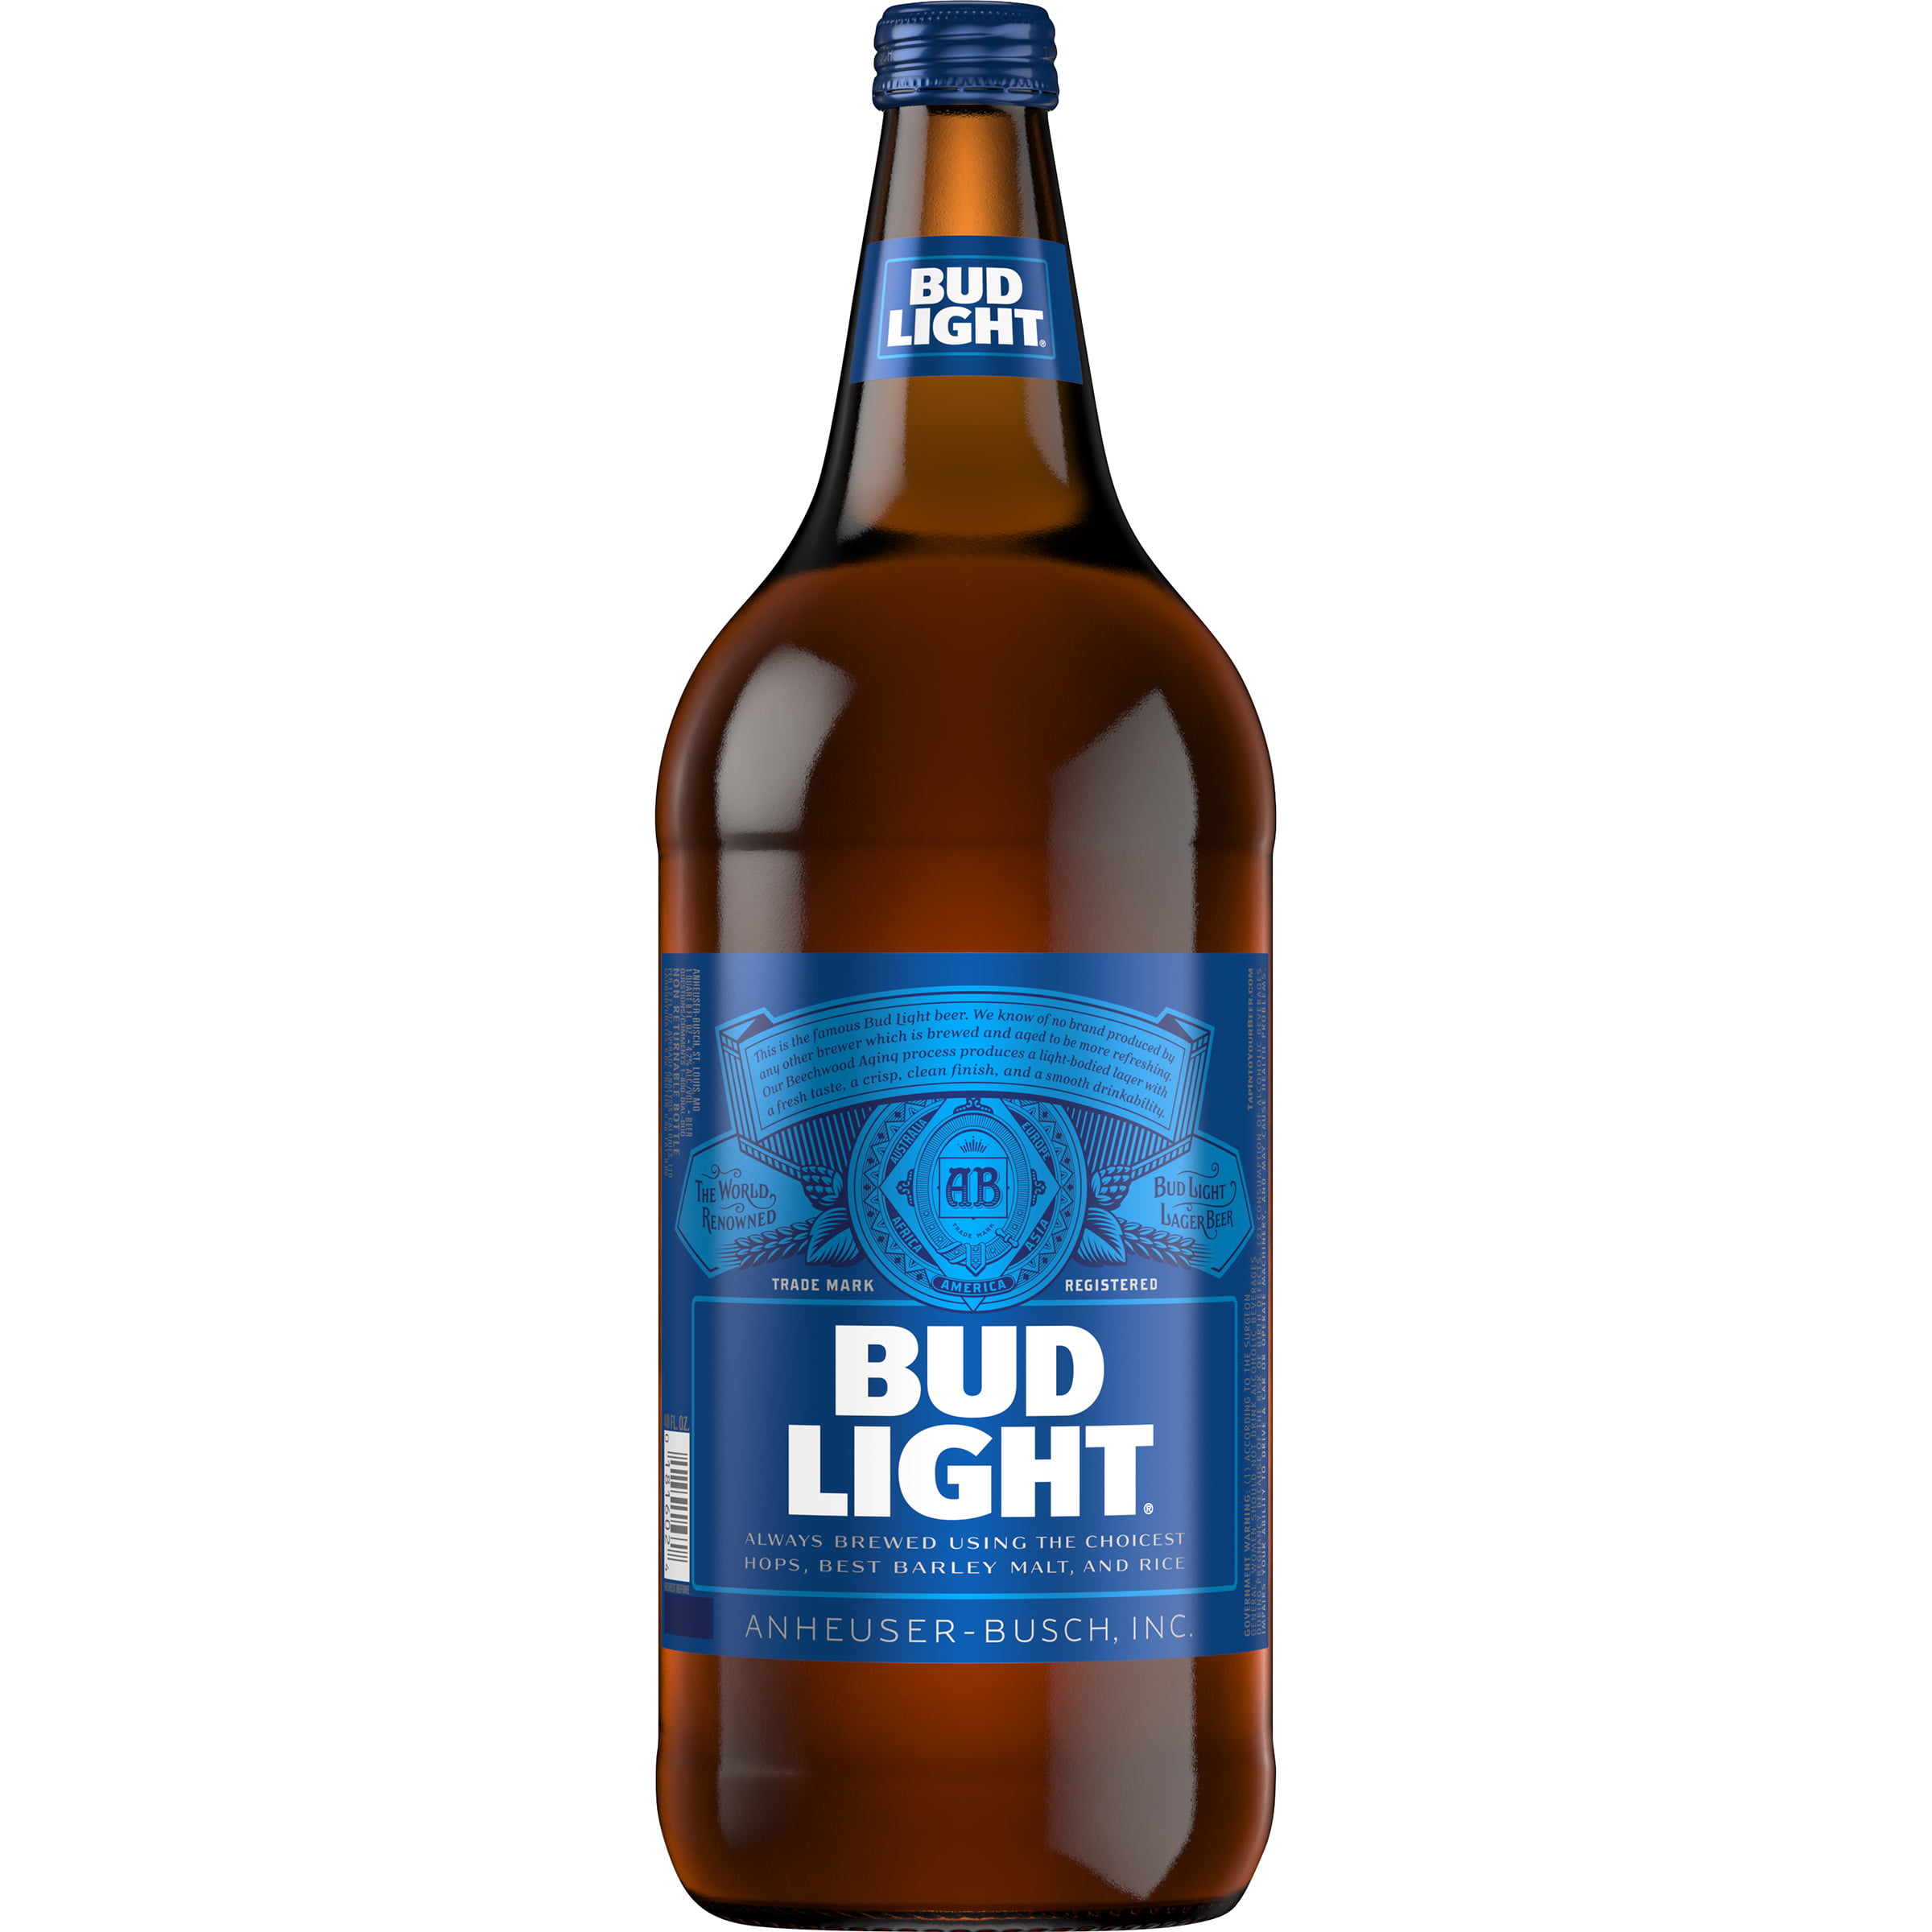 vesuviusdesign: What Is The Alcohol Content Of Bud Light